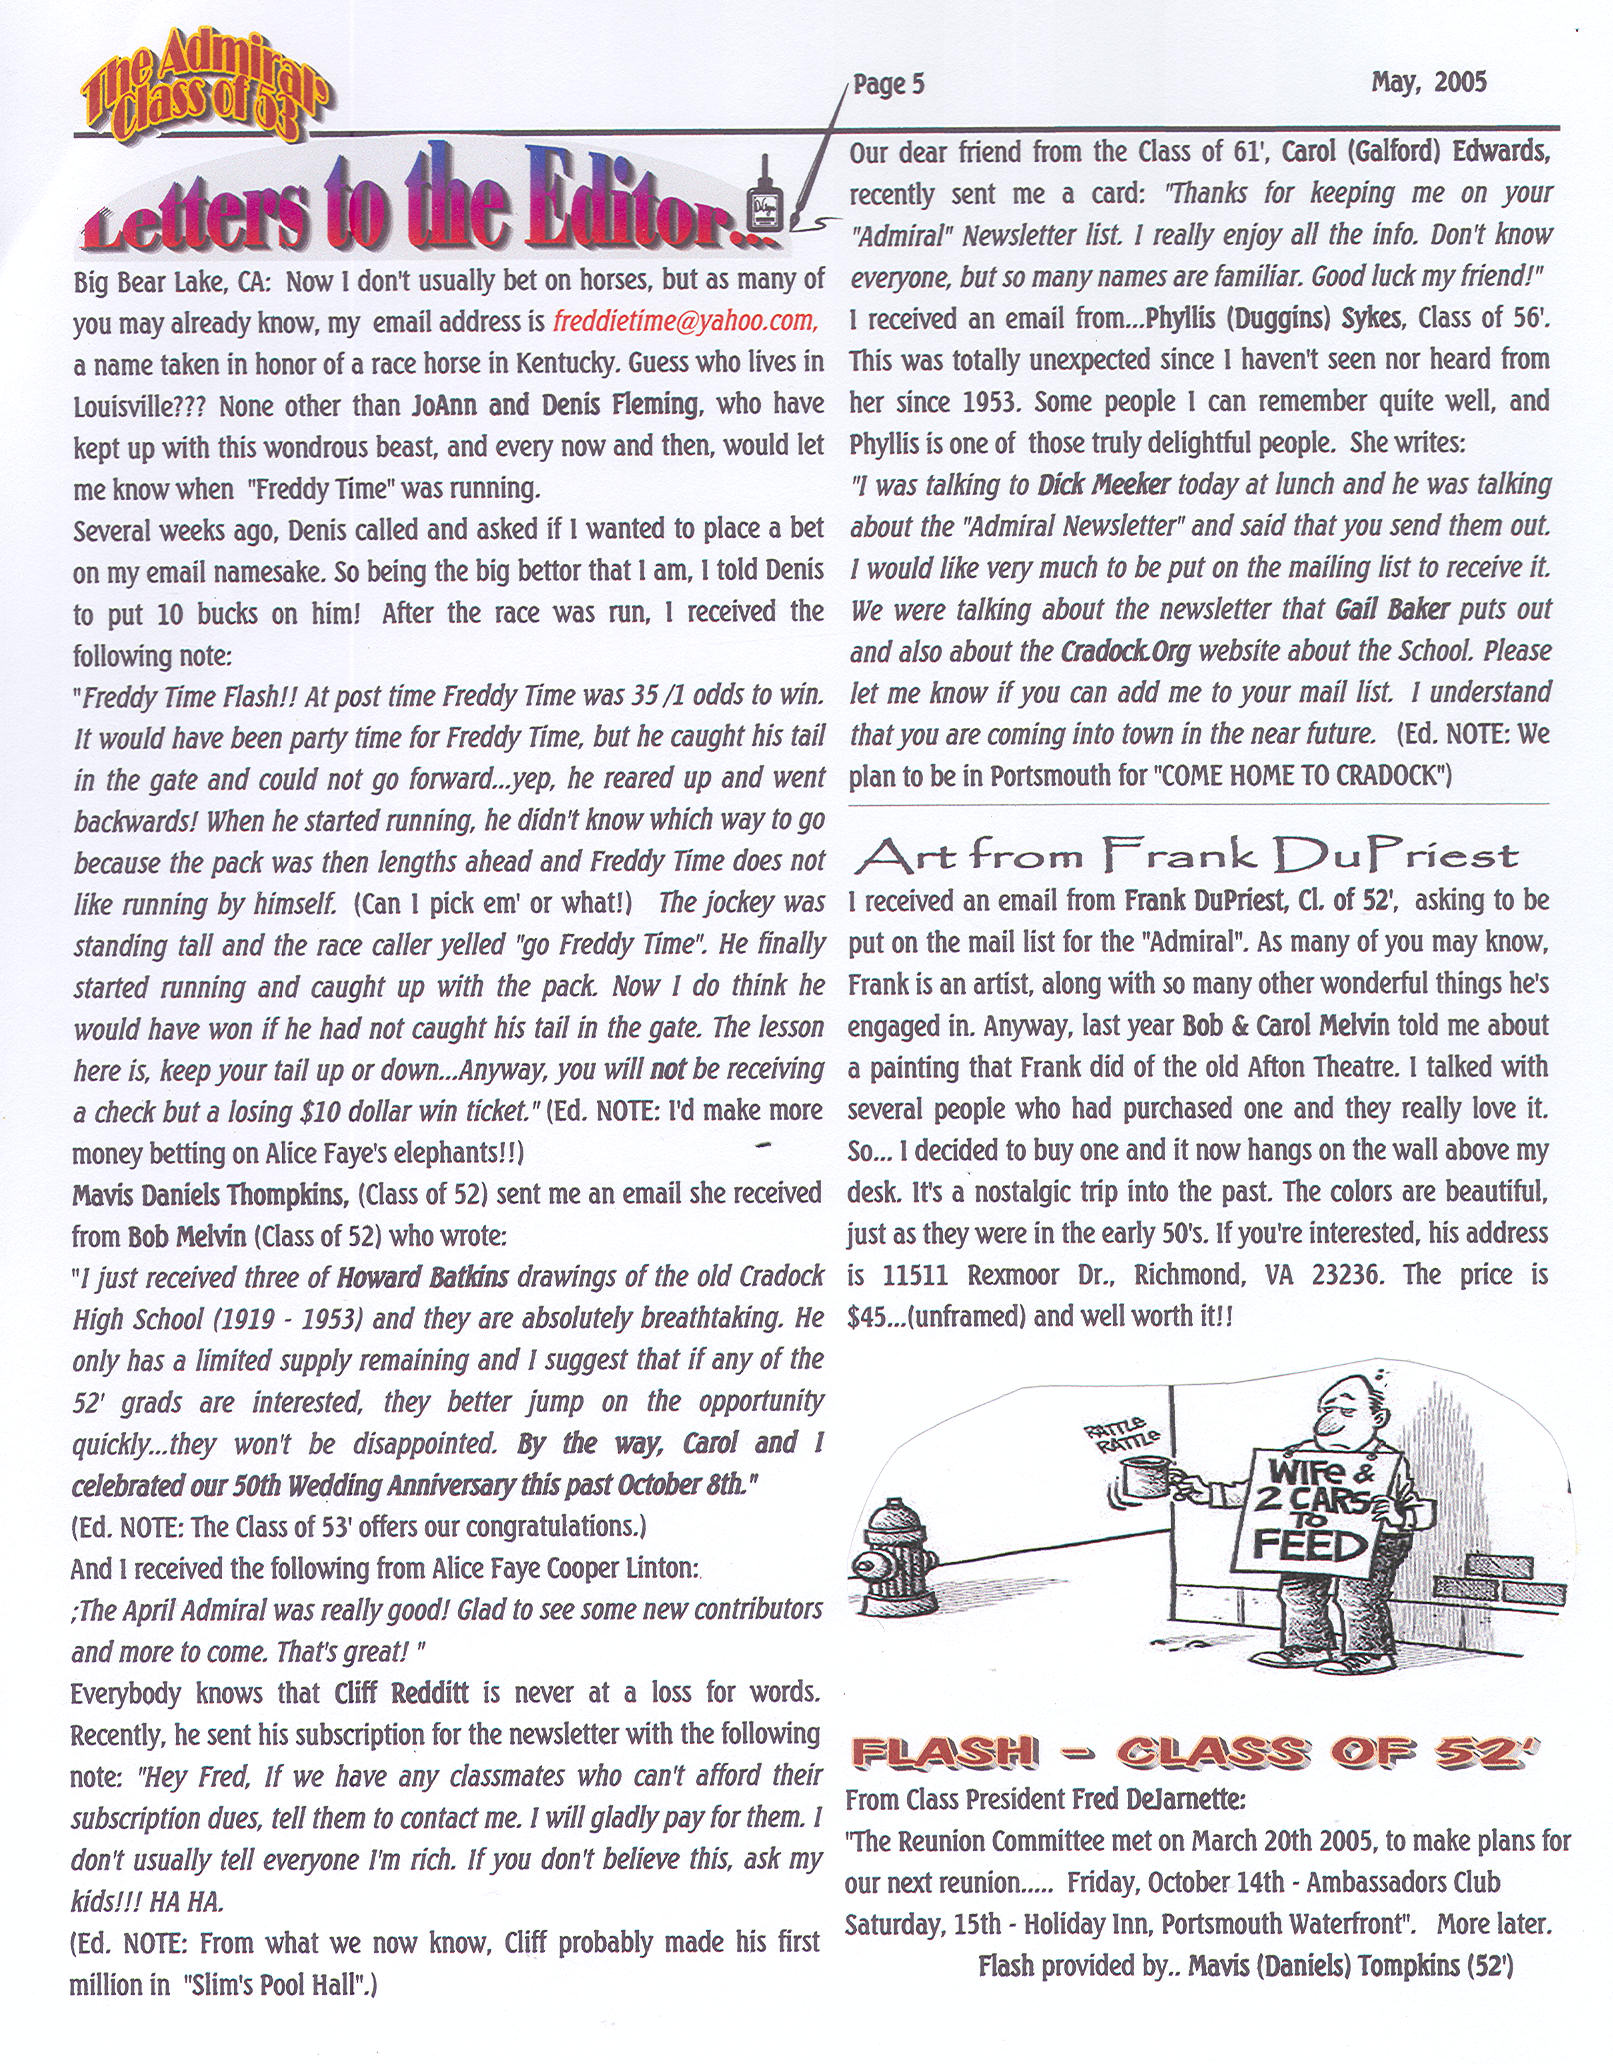 The Admiral - May 2005 - pg. 5